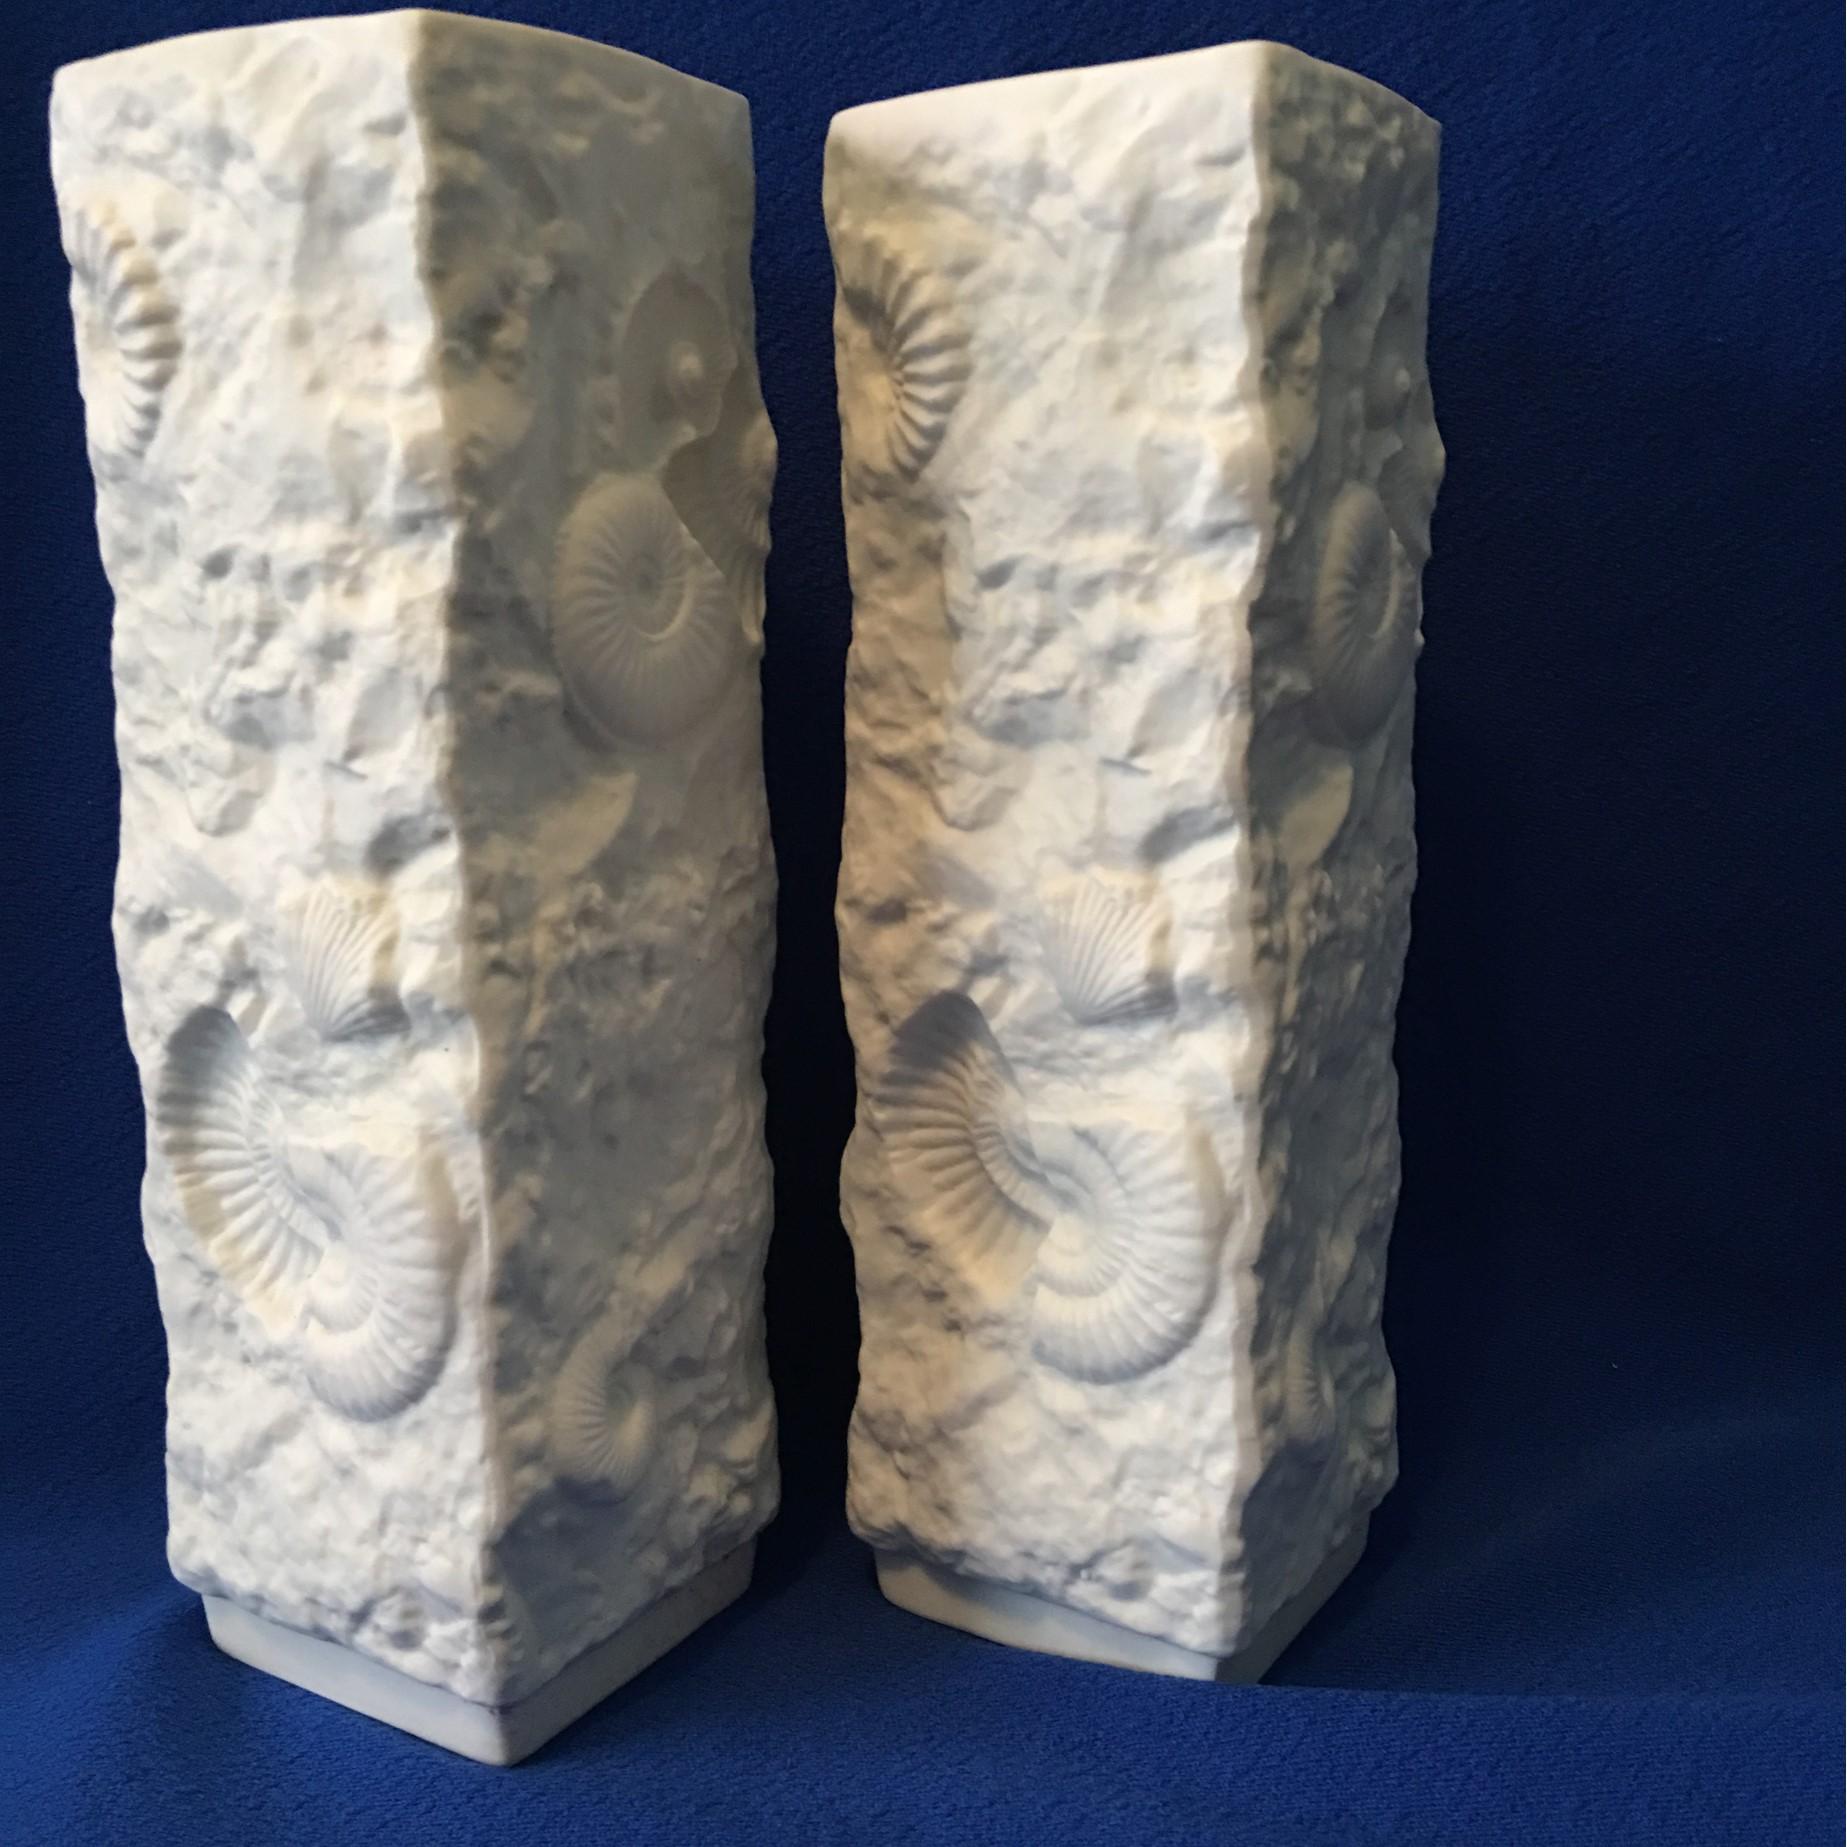 A lovely grand pair of white matte porcelain white fossil rock vases from the manufacture of Kaiser of Germany. Great looking set of attractive vases. Real eye catchers.